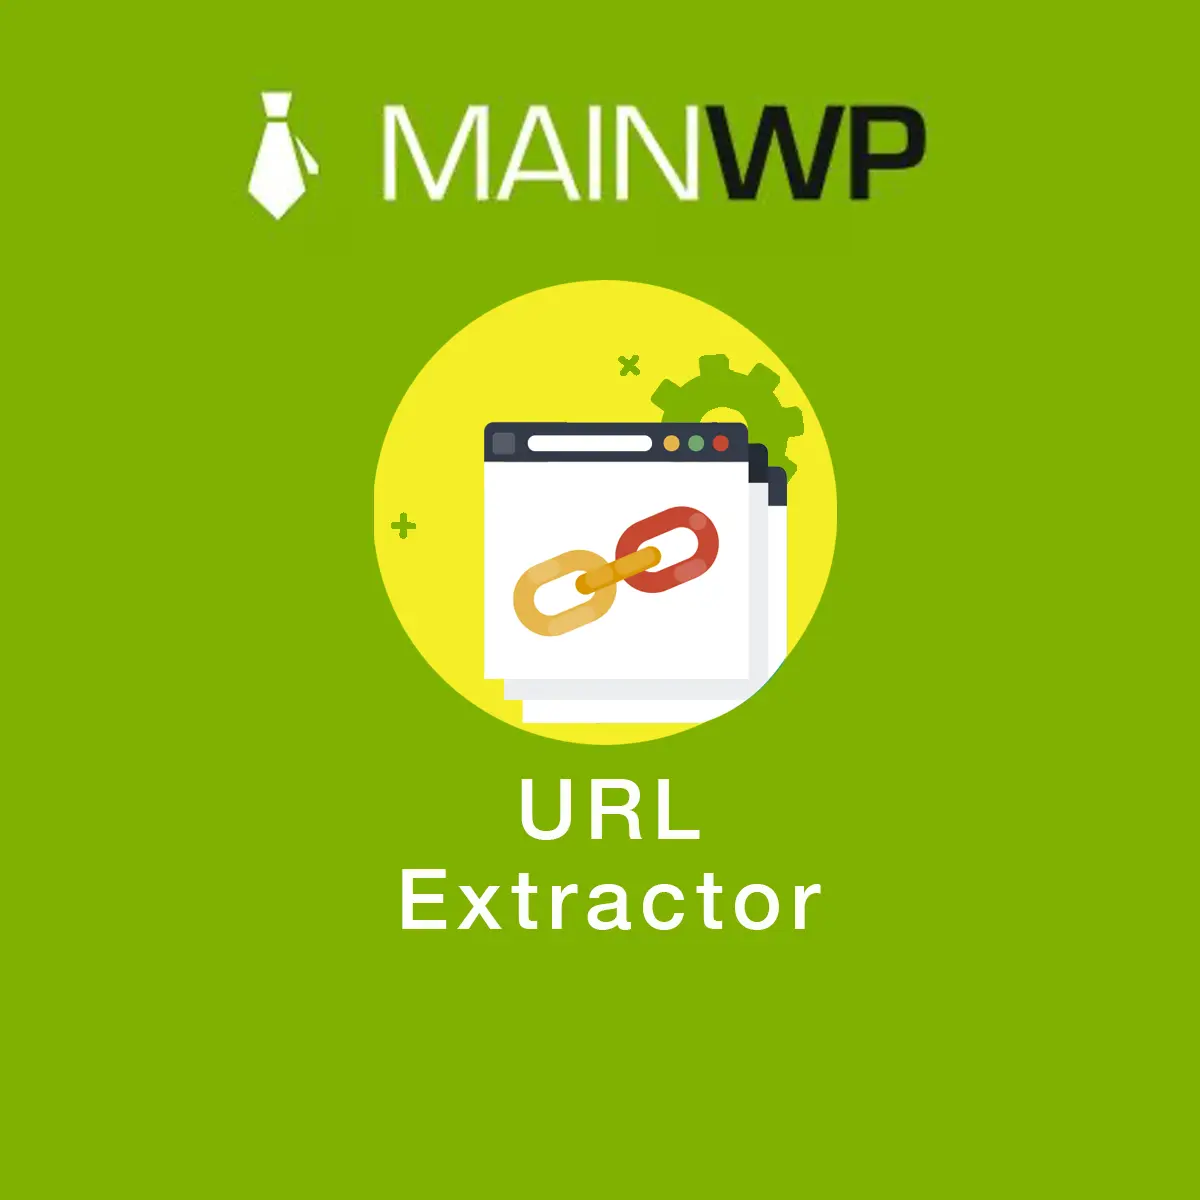 Download MainWP Url Extractor Extension